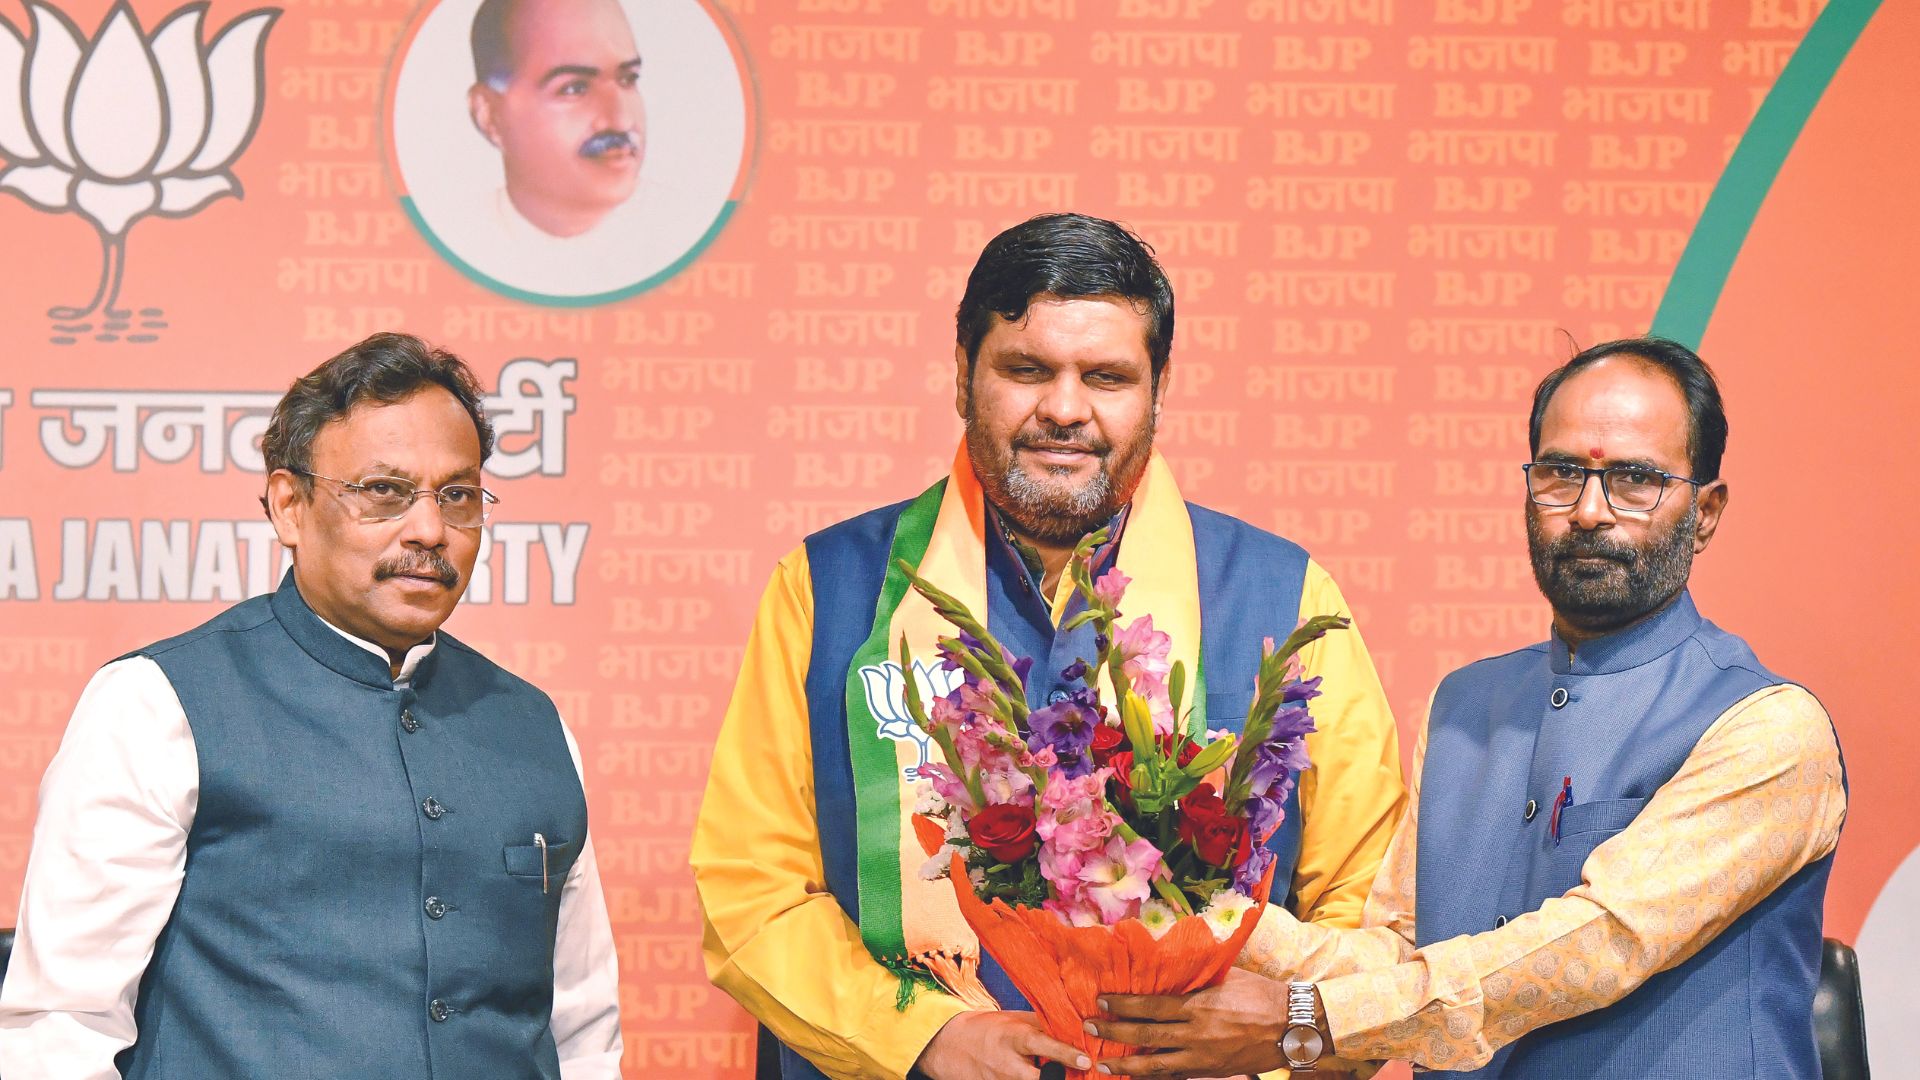 Former Congress leader Gourav Vallabh joins BJP, in the presence of BJP General Secretary Vinod Tawde and party leader Sanjay Mayukh in New Delhi on Thursday. (ANI Photo)